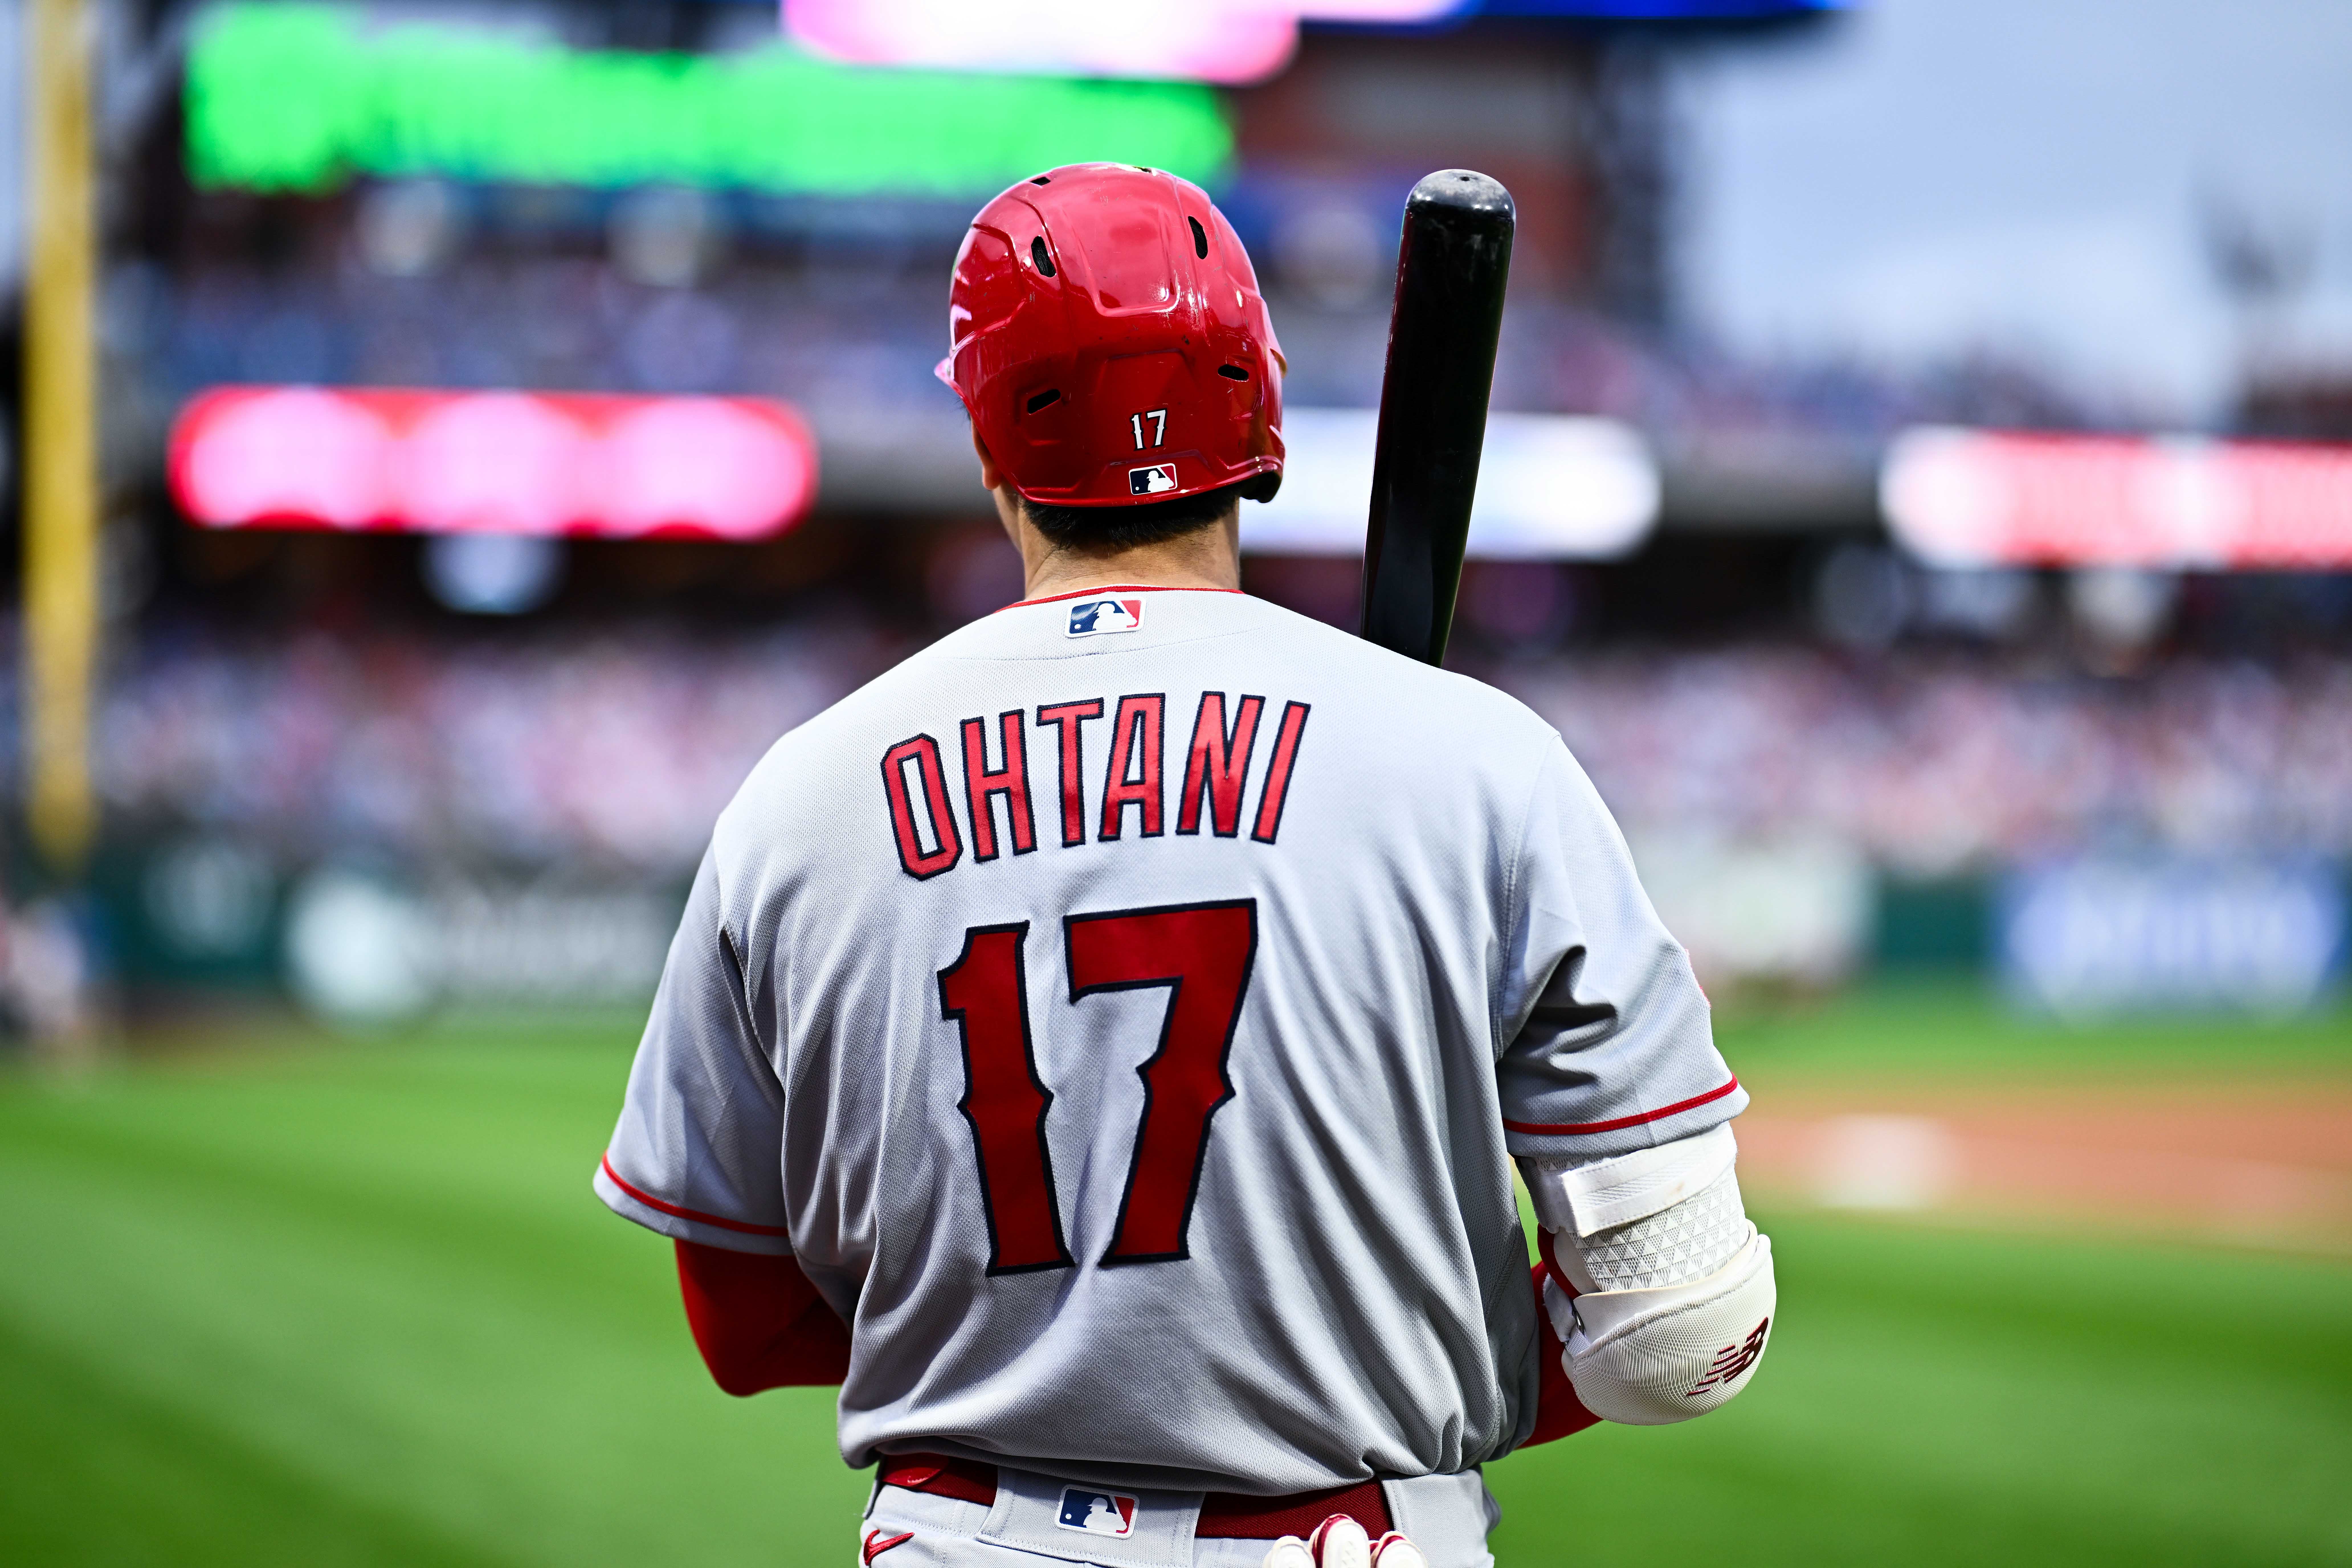 The Diamondbacks did not sign former Los Angeles Angels superstar Shohei Ohtani. He is now a member of the Los Angeles Dodgers.